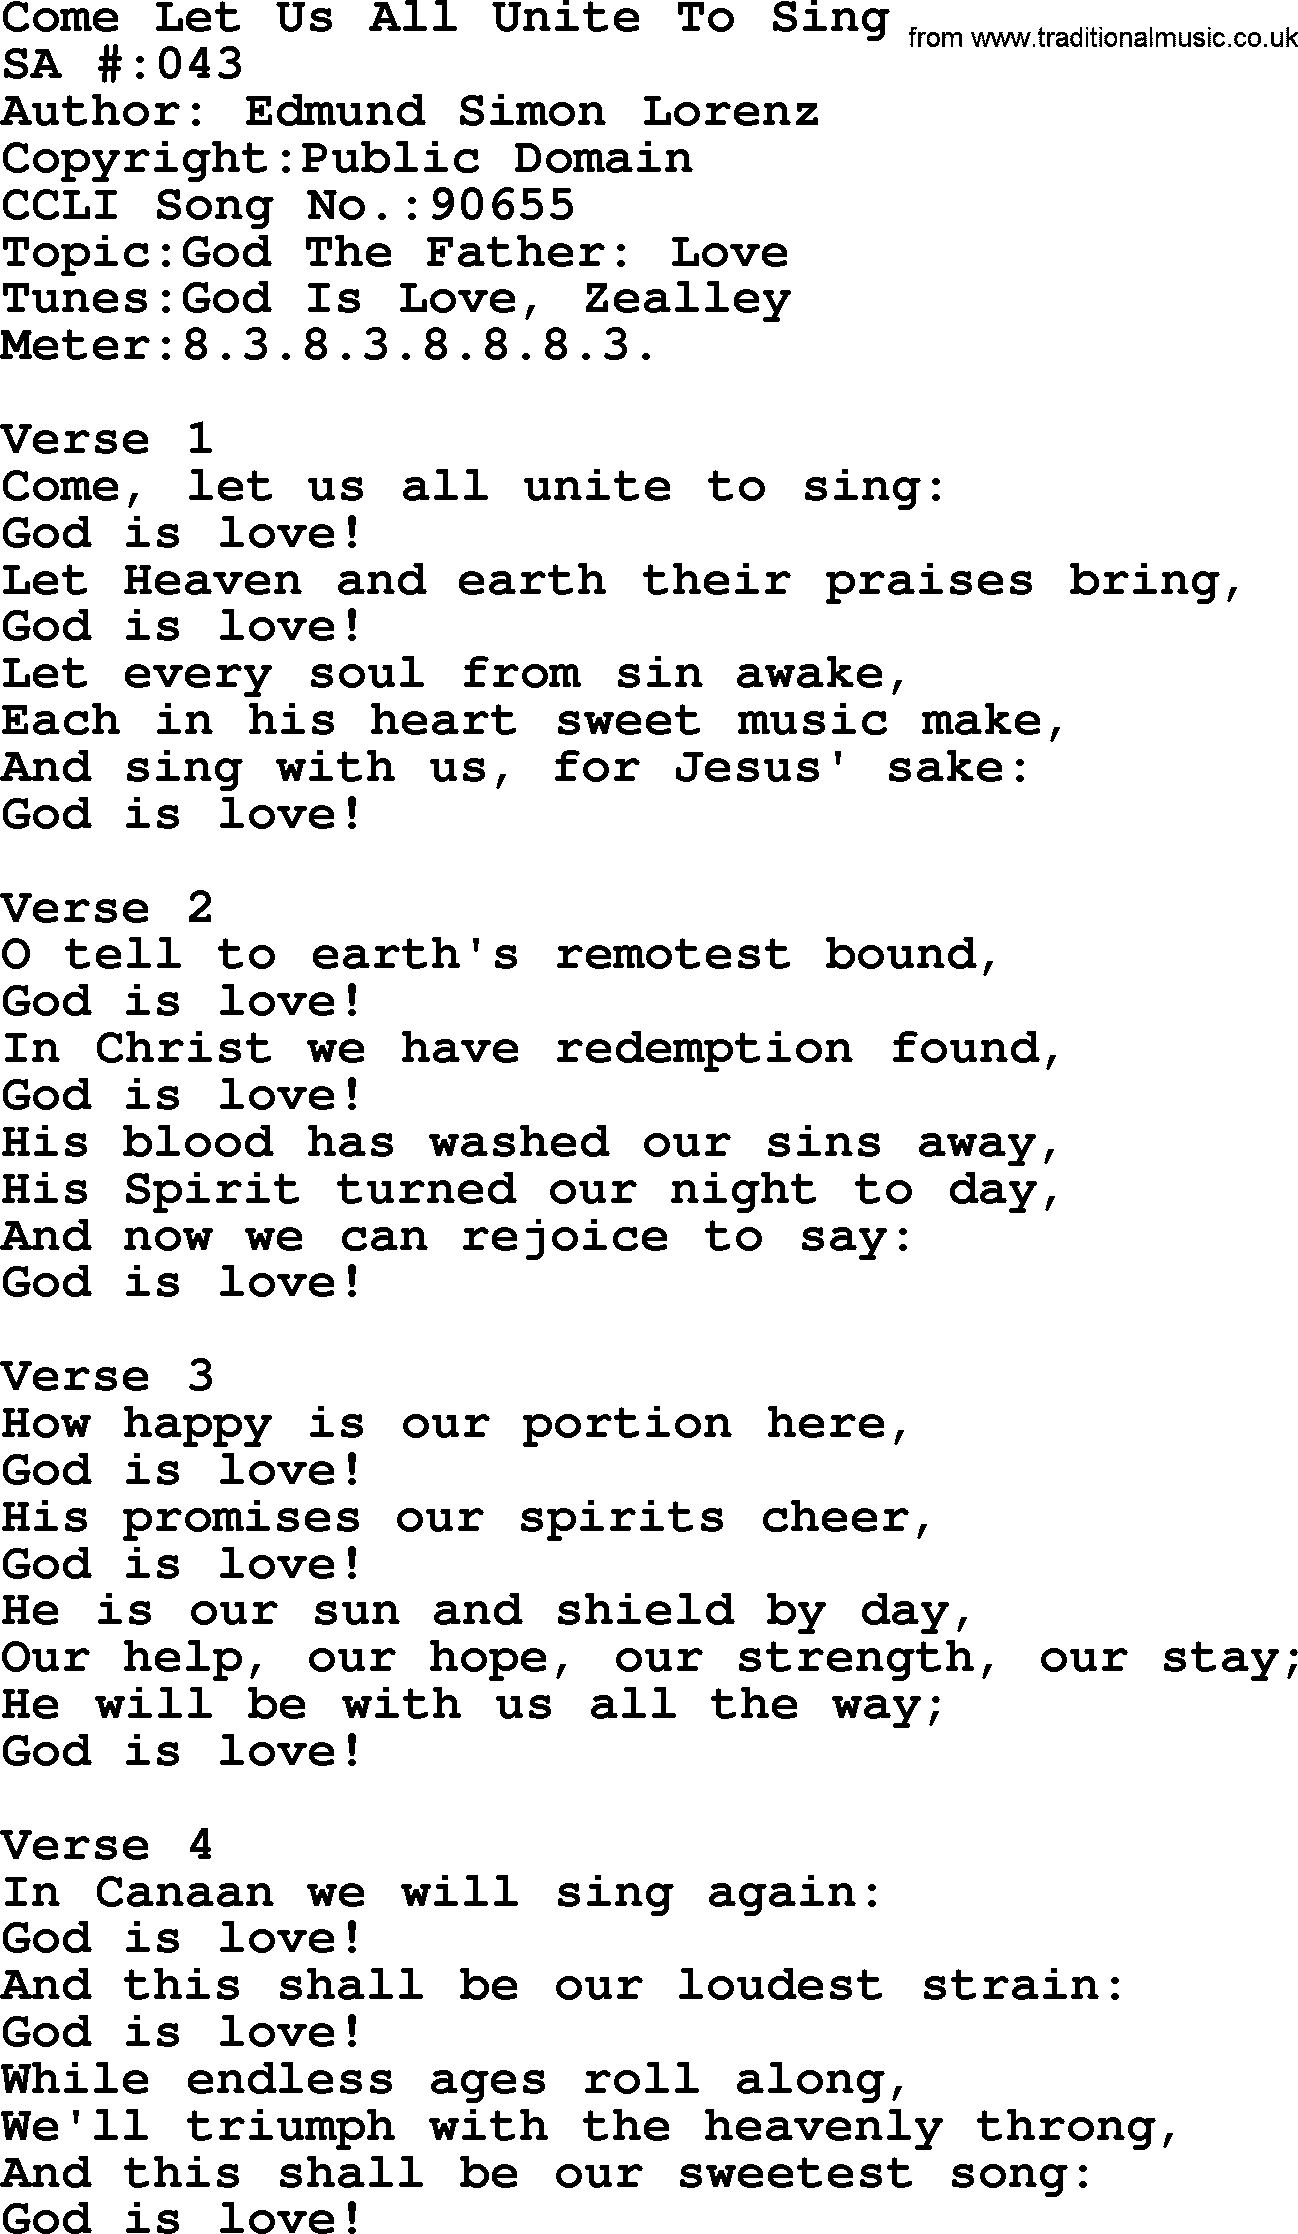 Salvation Army Hymnal, title: Come Let Us All Unite To Sing, with lyrics and PDF,